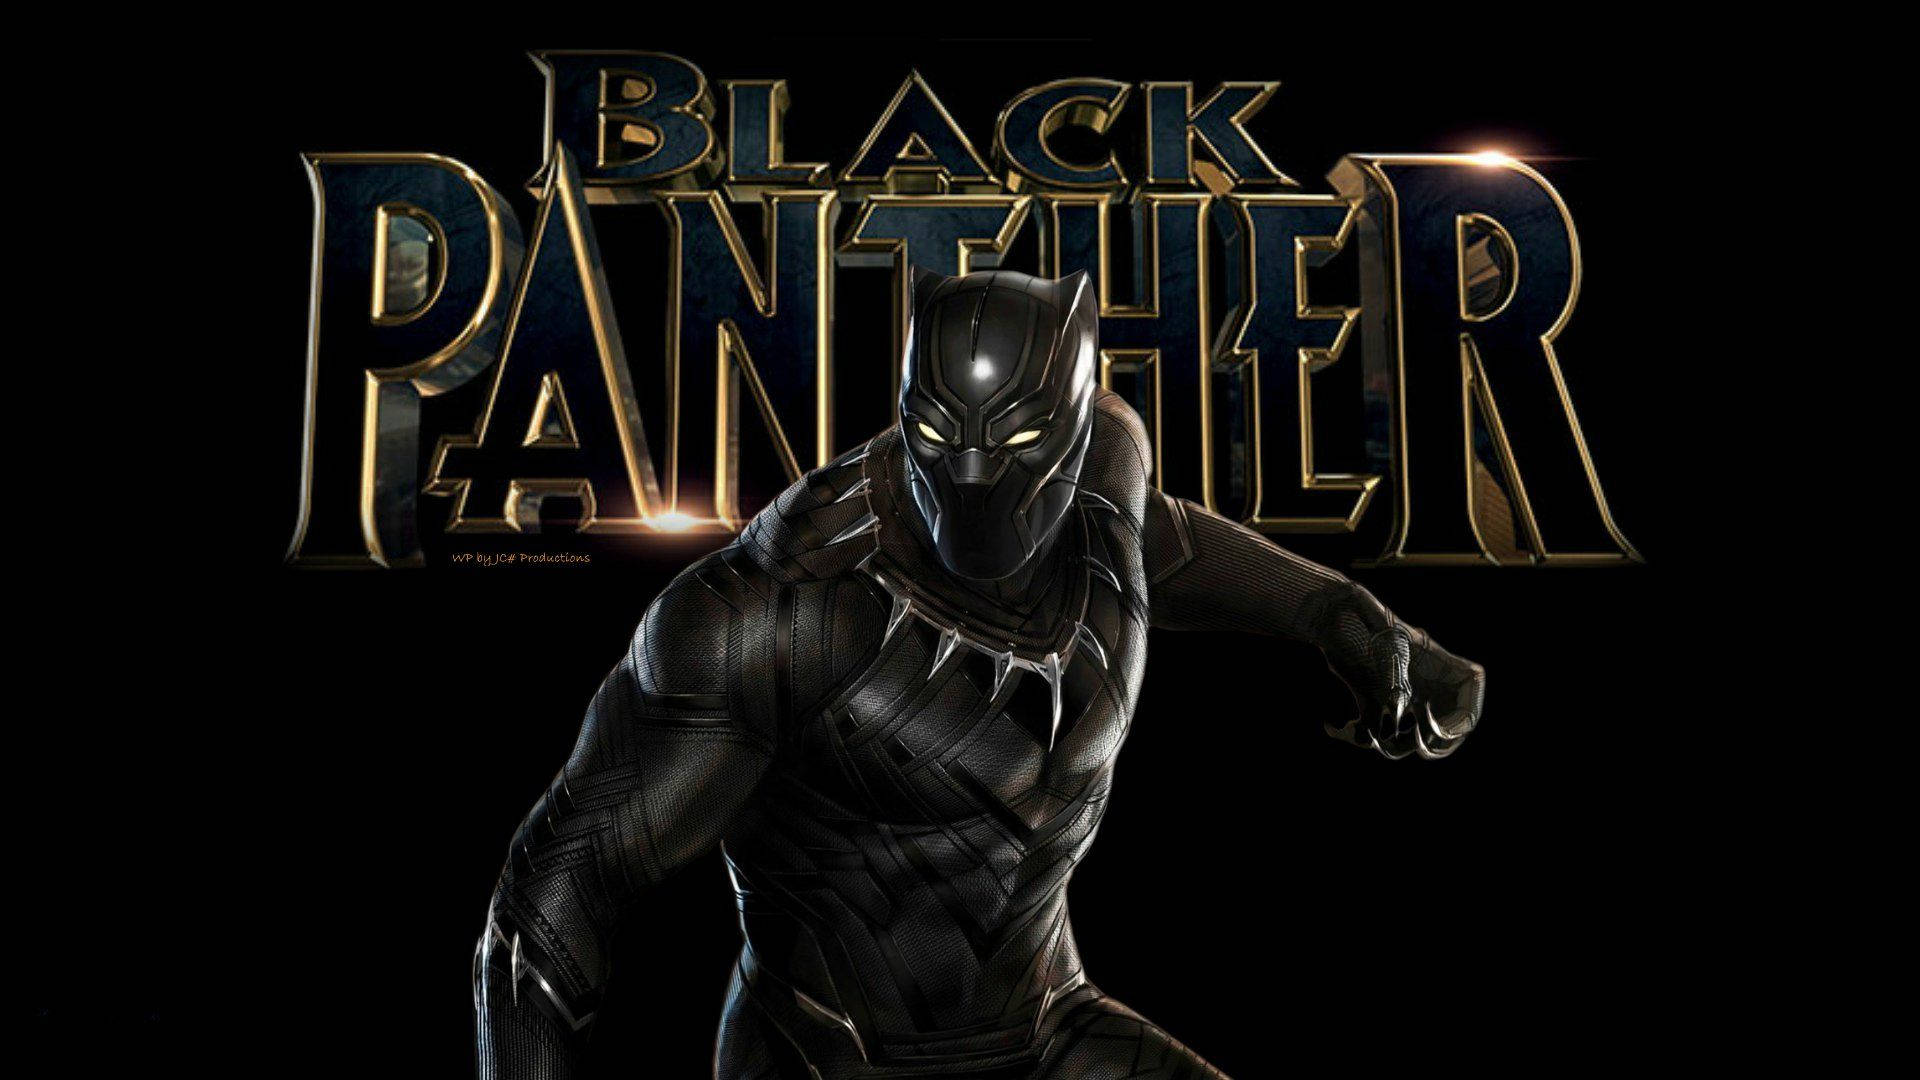 Black Panther Comic Book Cover